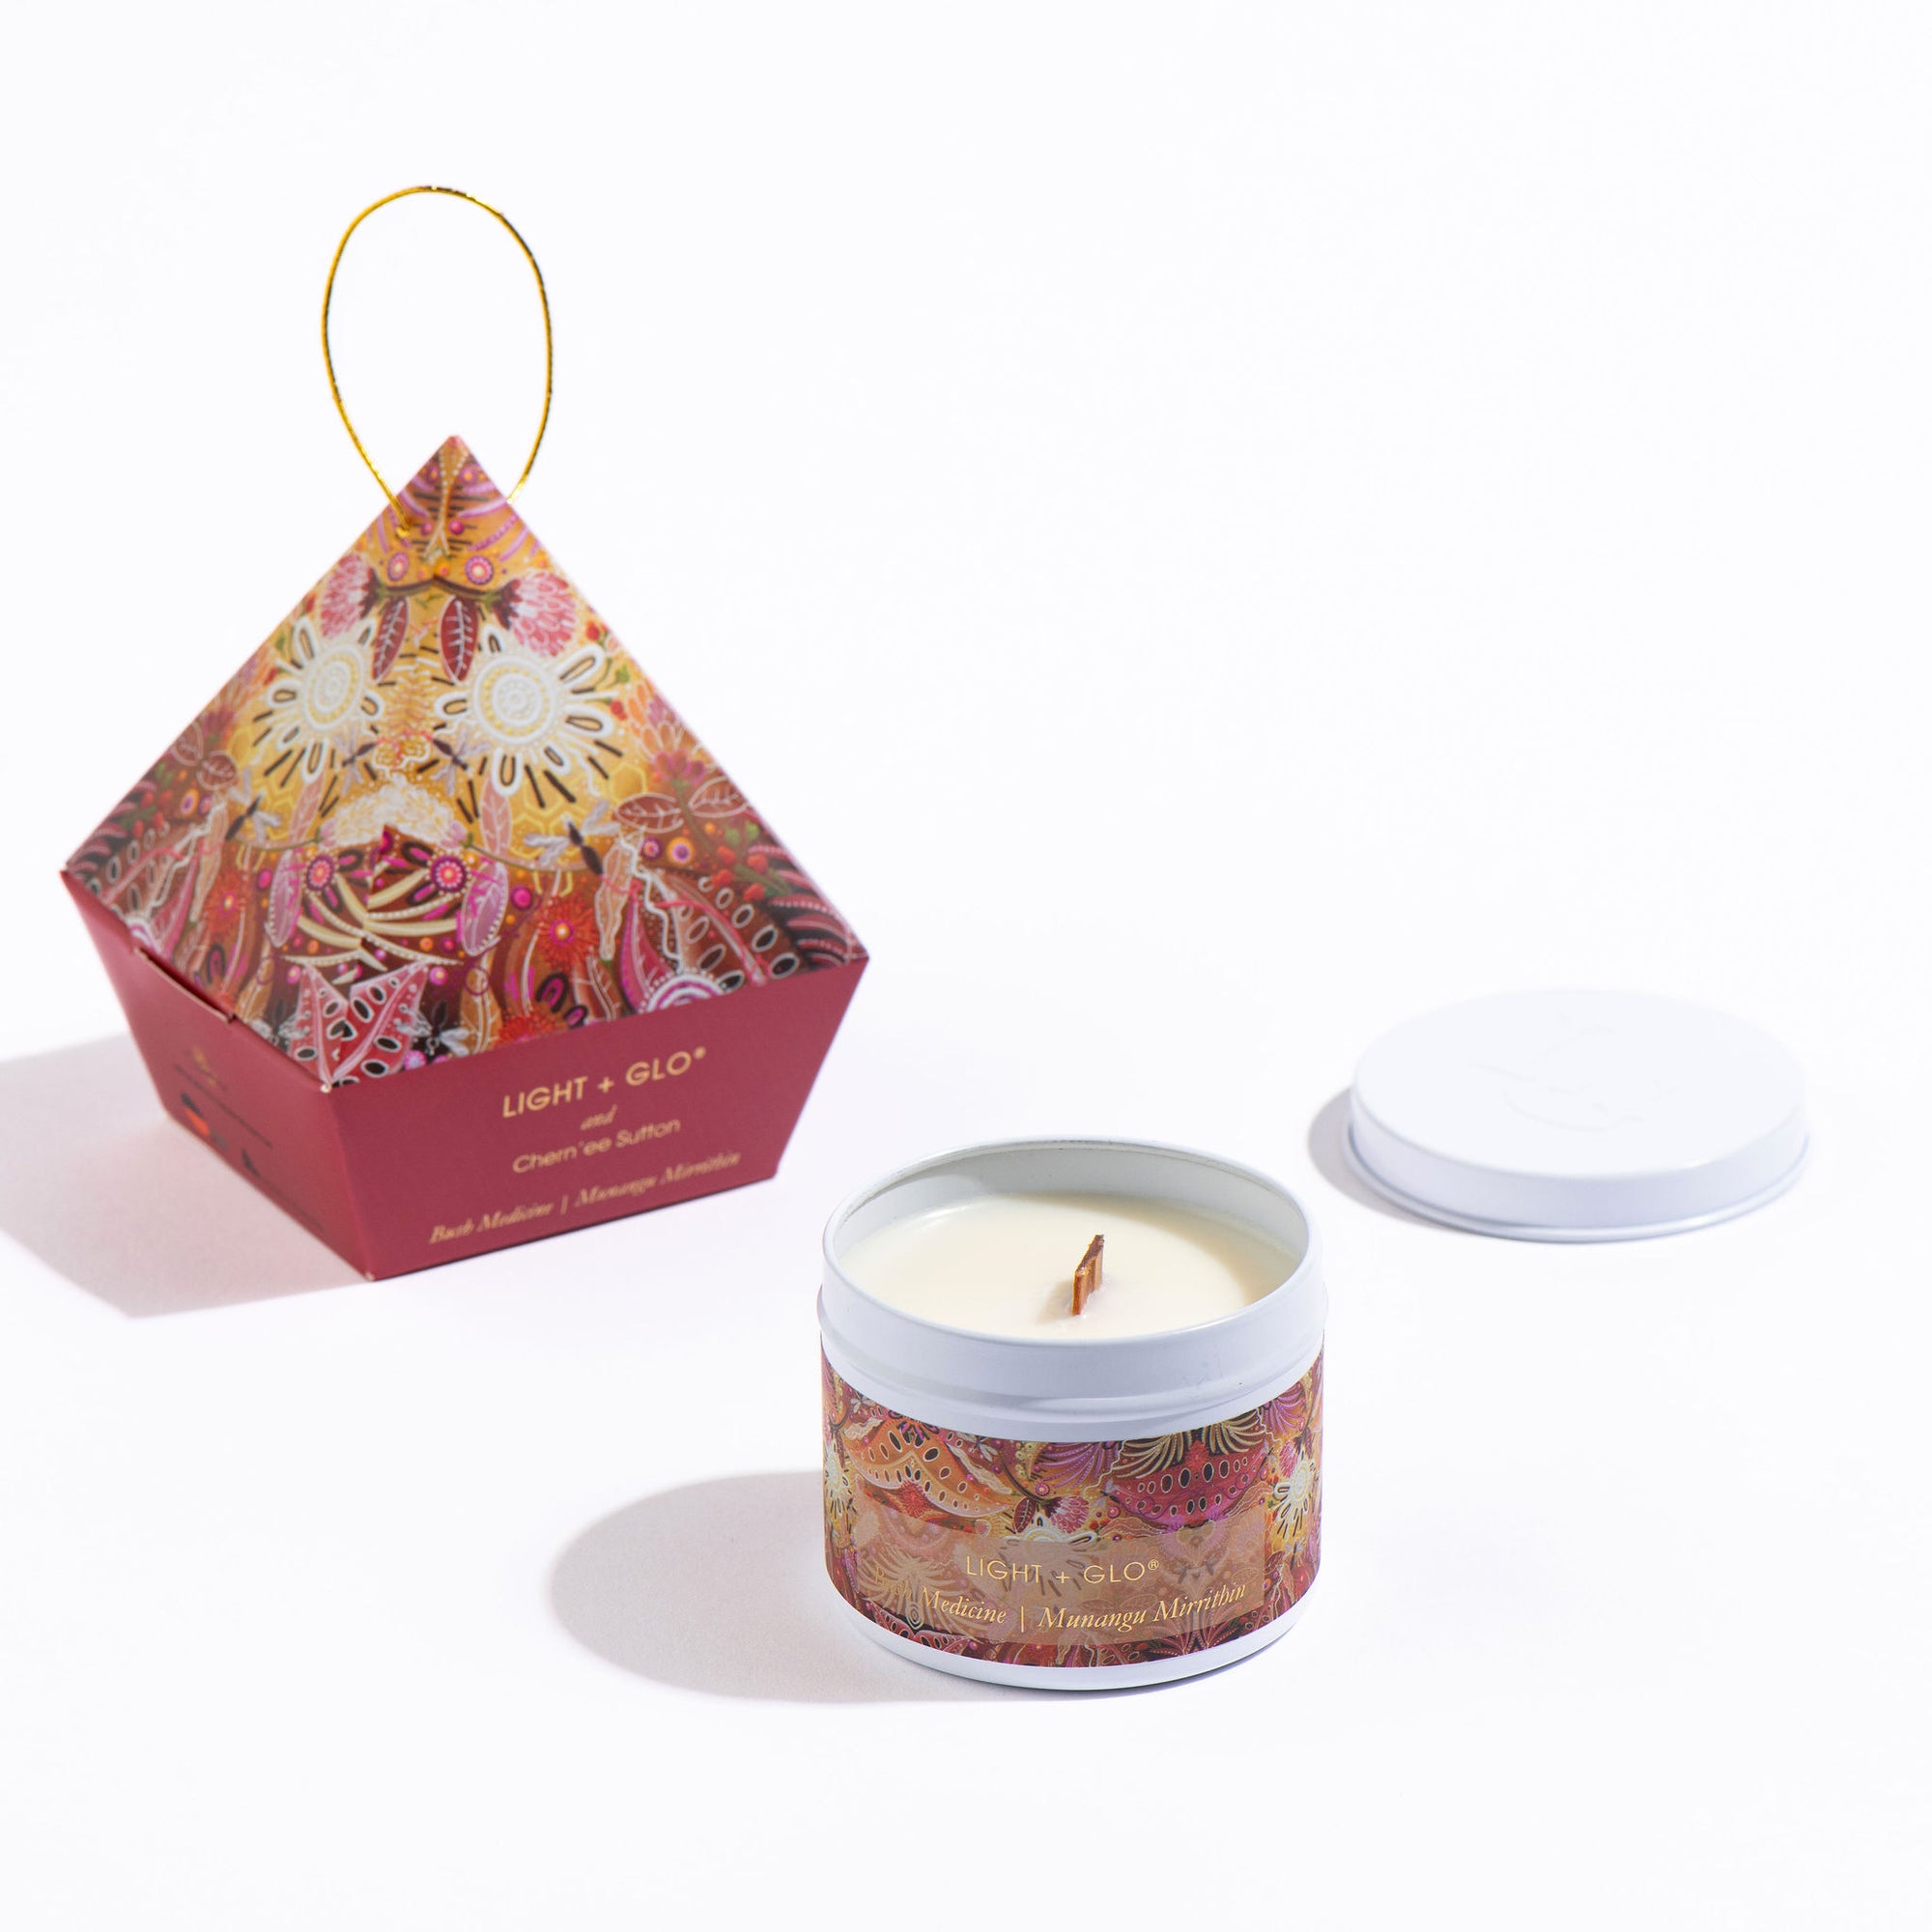 Chern'ee Sutton - Bush Medicine Bauble Limited Edition Candle | Luxury Candles & Home Fragrances by Light + Glo